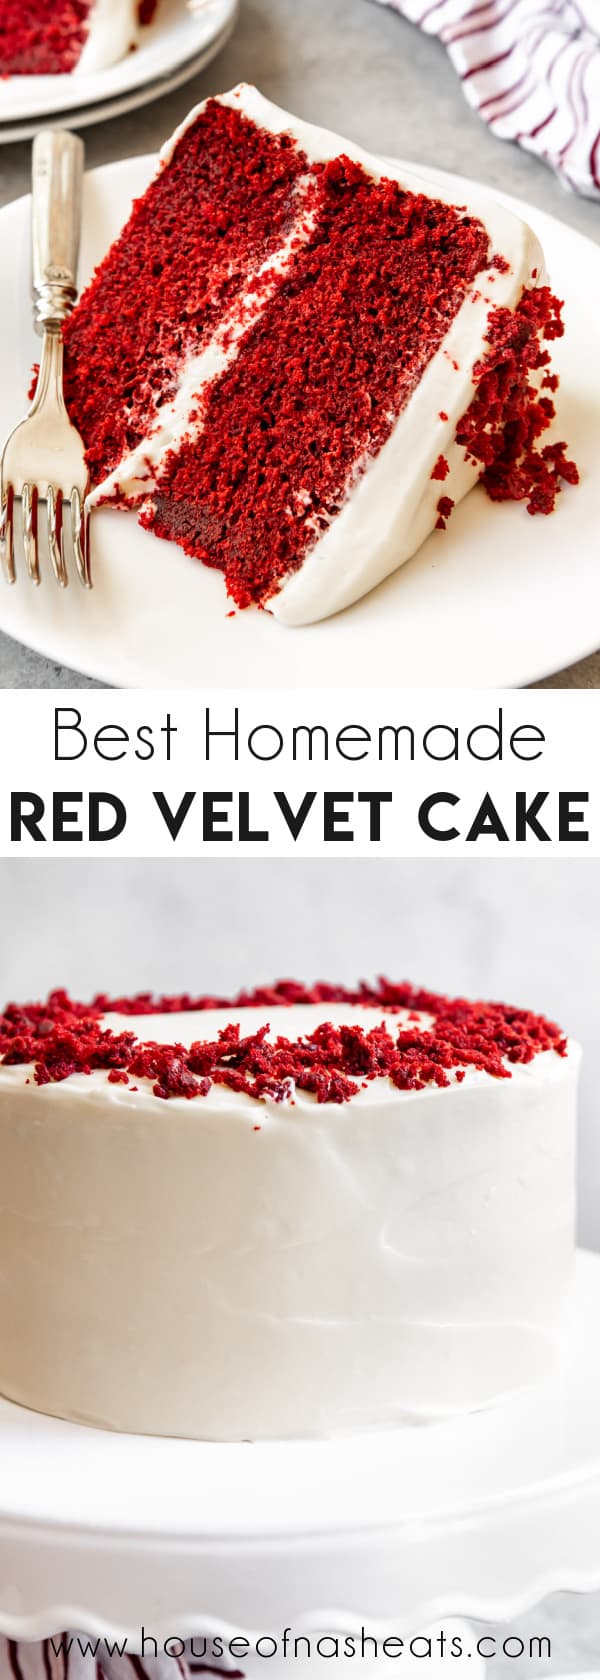 A collage of images of red velvet cake with text overlay.